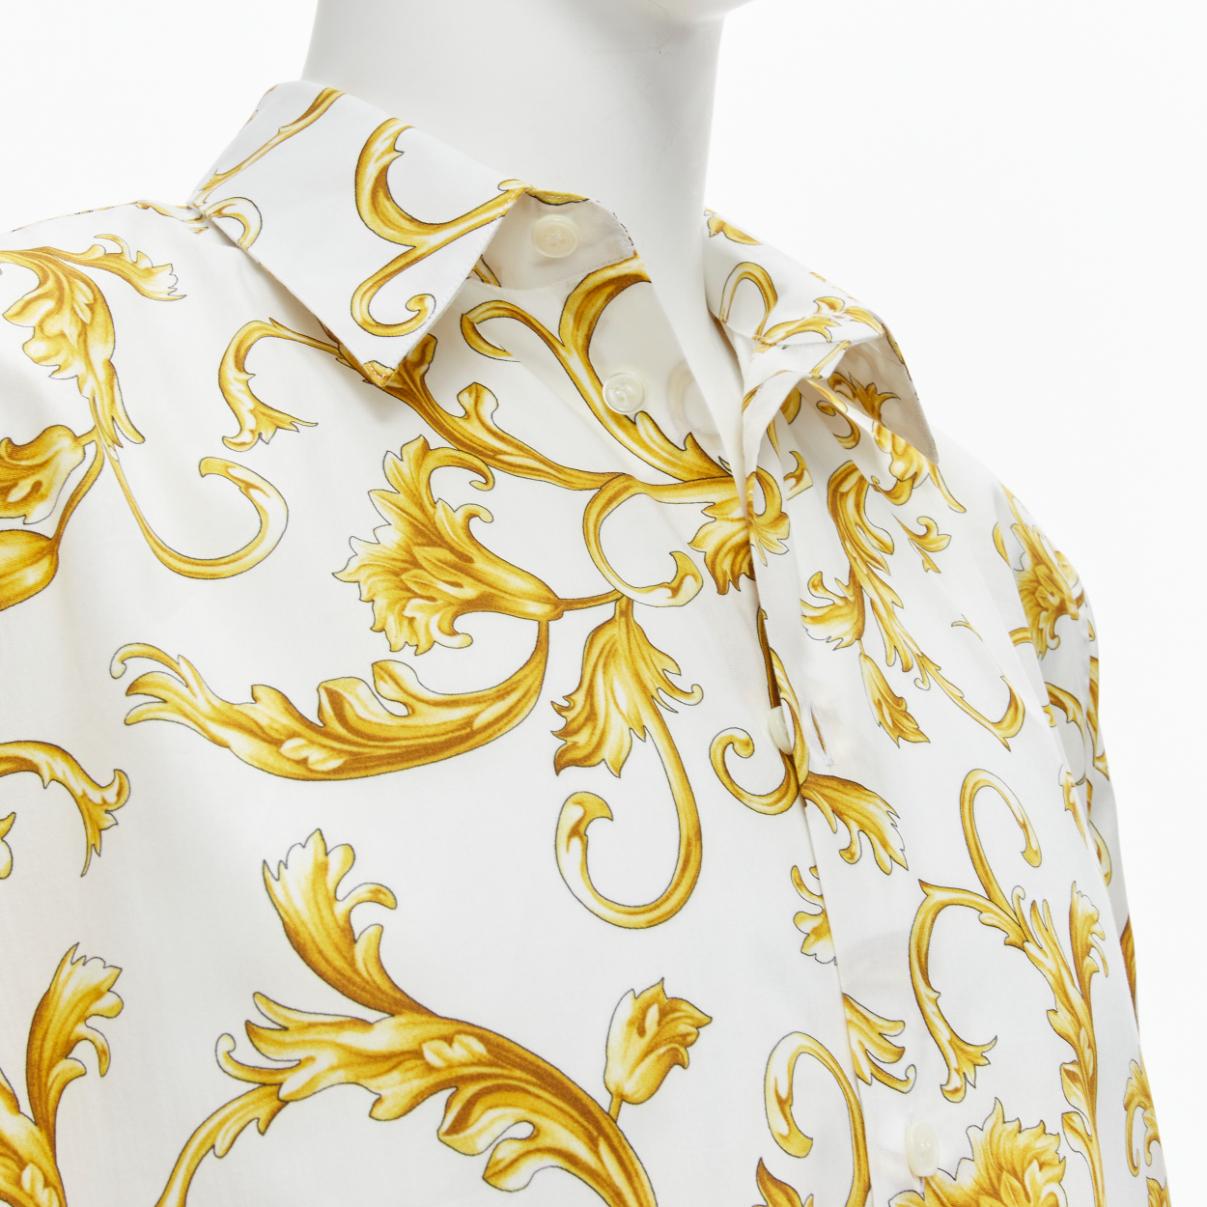 new VERSACE Barocco Rococo white gold floral leaf print cotton shirt EU40 M
Reference: TGAS/C01492
Brand: Versace
Designer: Donatella Versace
Model: A77215S
Collection: Versace Barocco
Material: Cotton
Color: White, Gold
Pattern: Barocco
Closure: